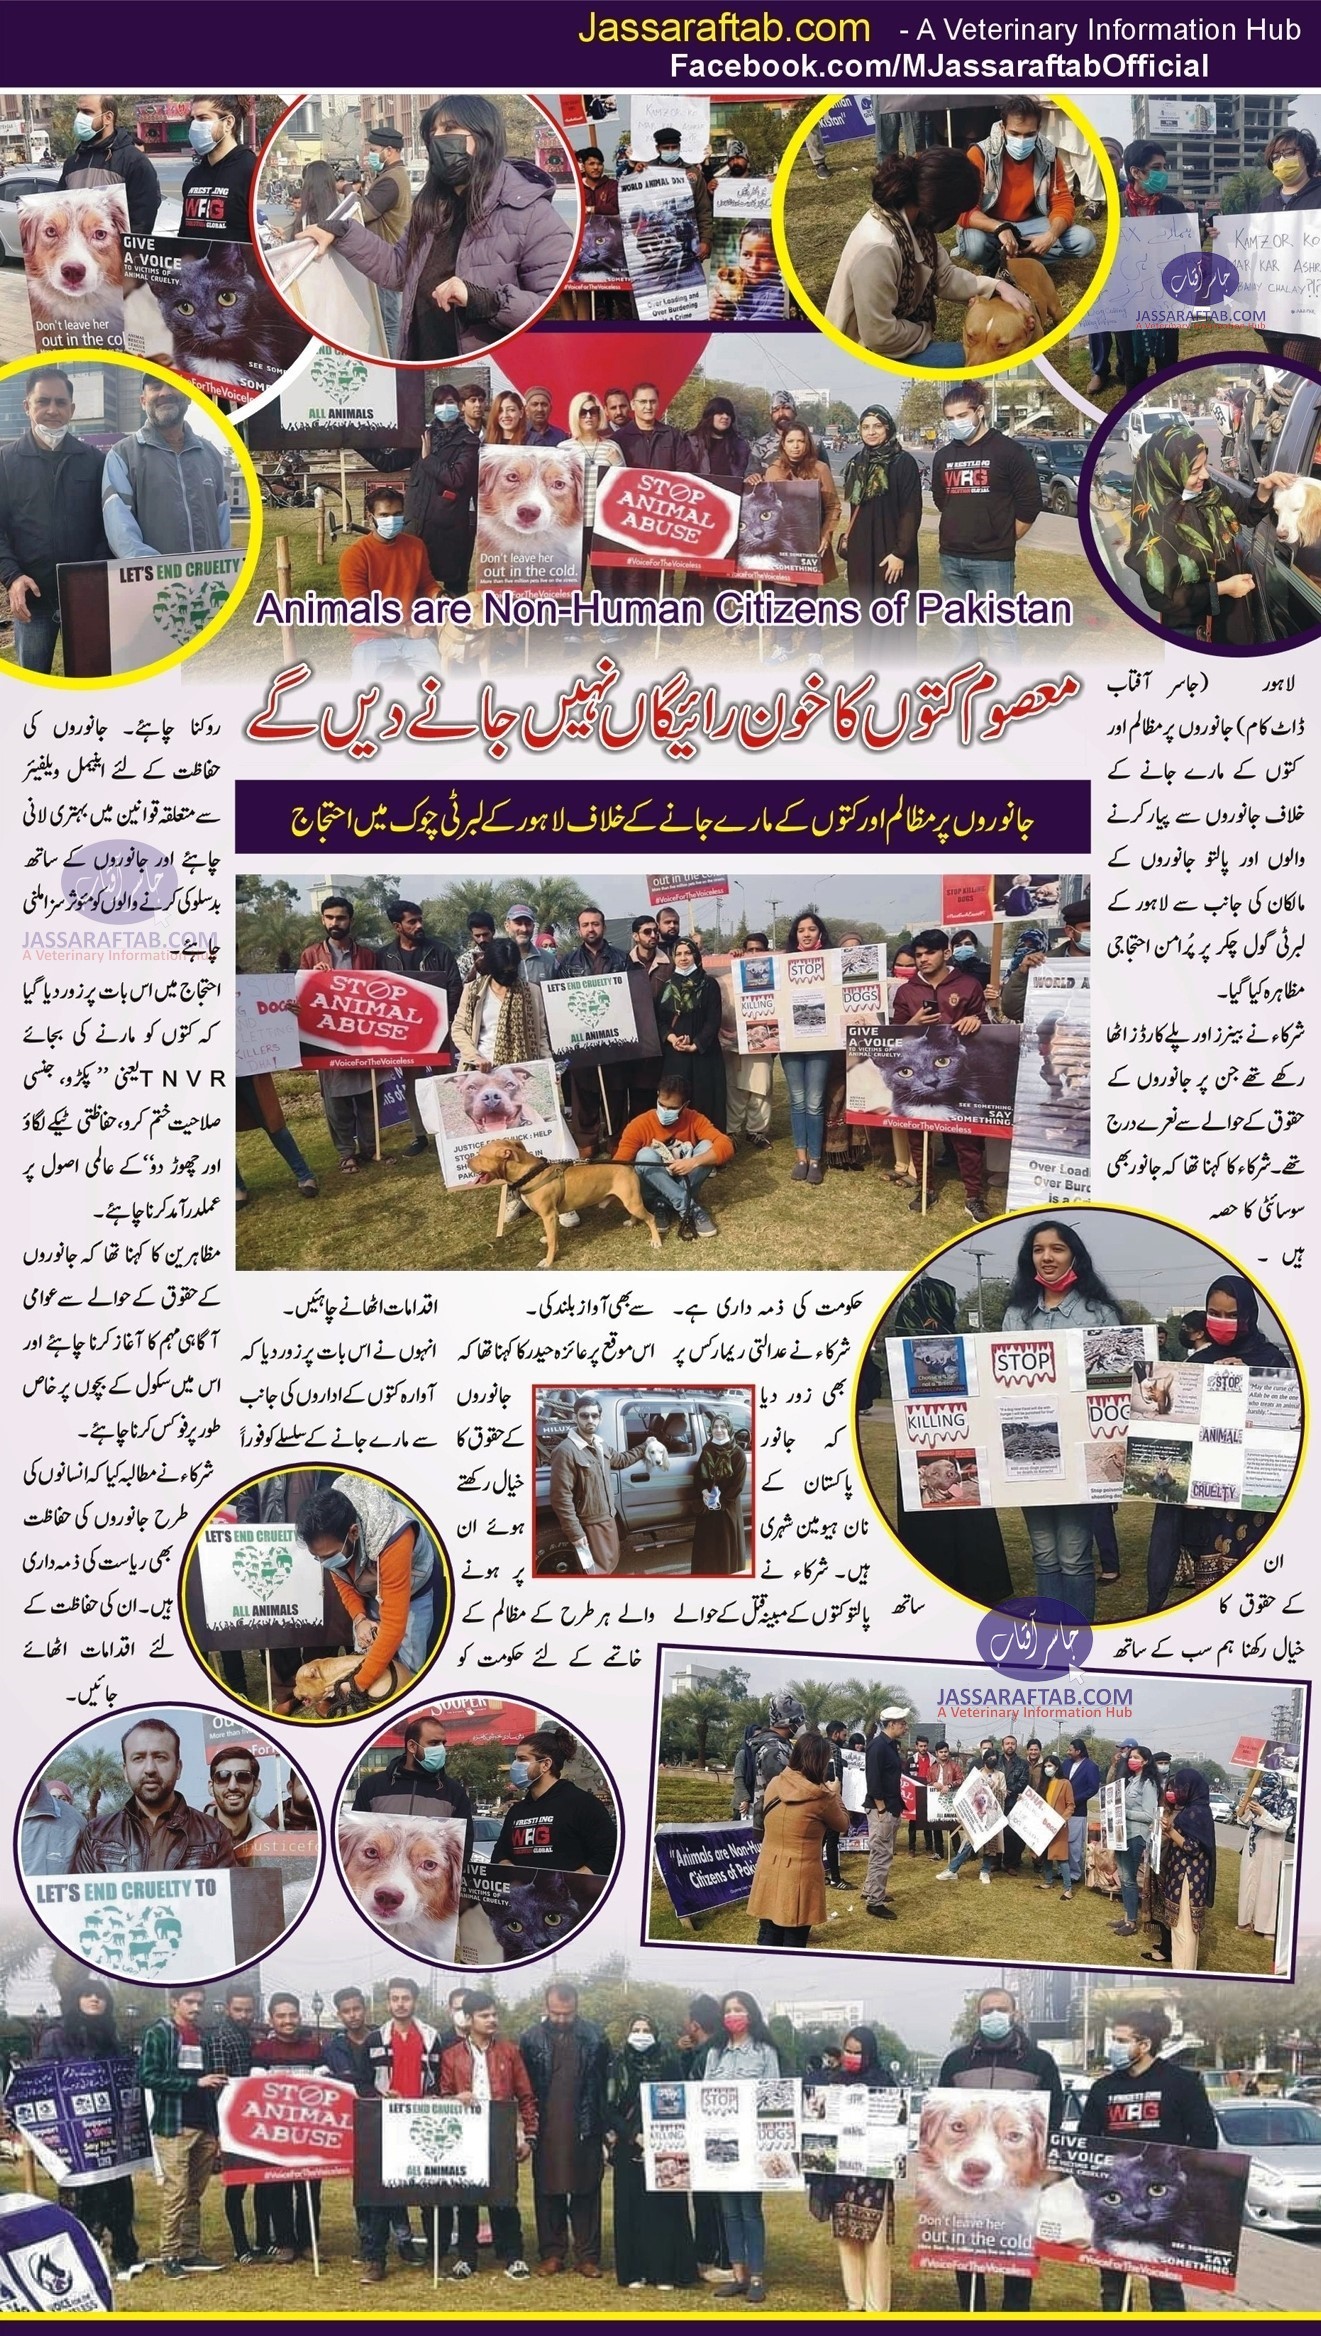 Protest held against animal cruelty at Liberty Lahore by Animal Rights activists |